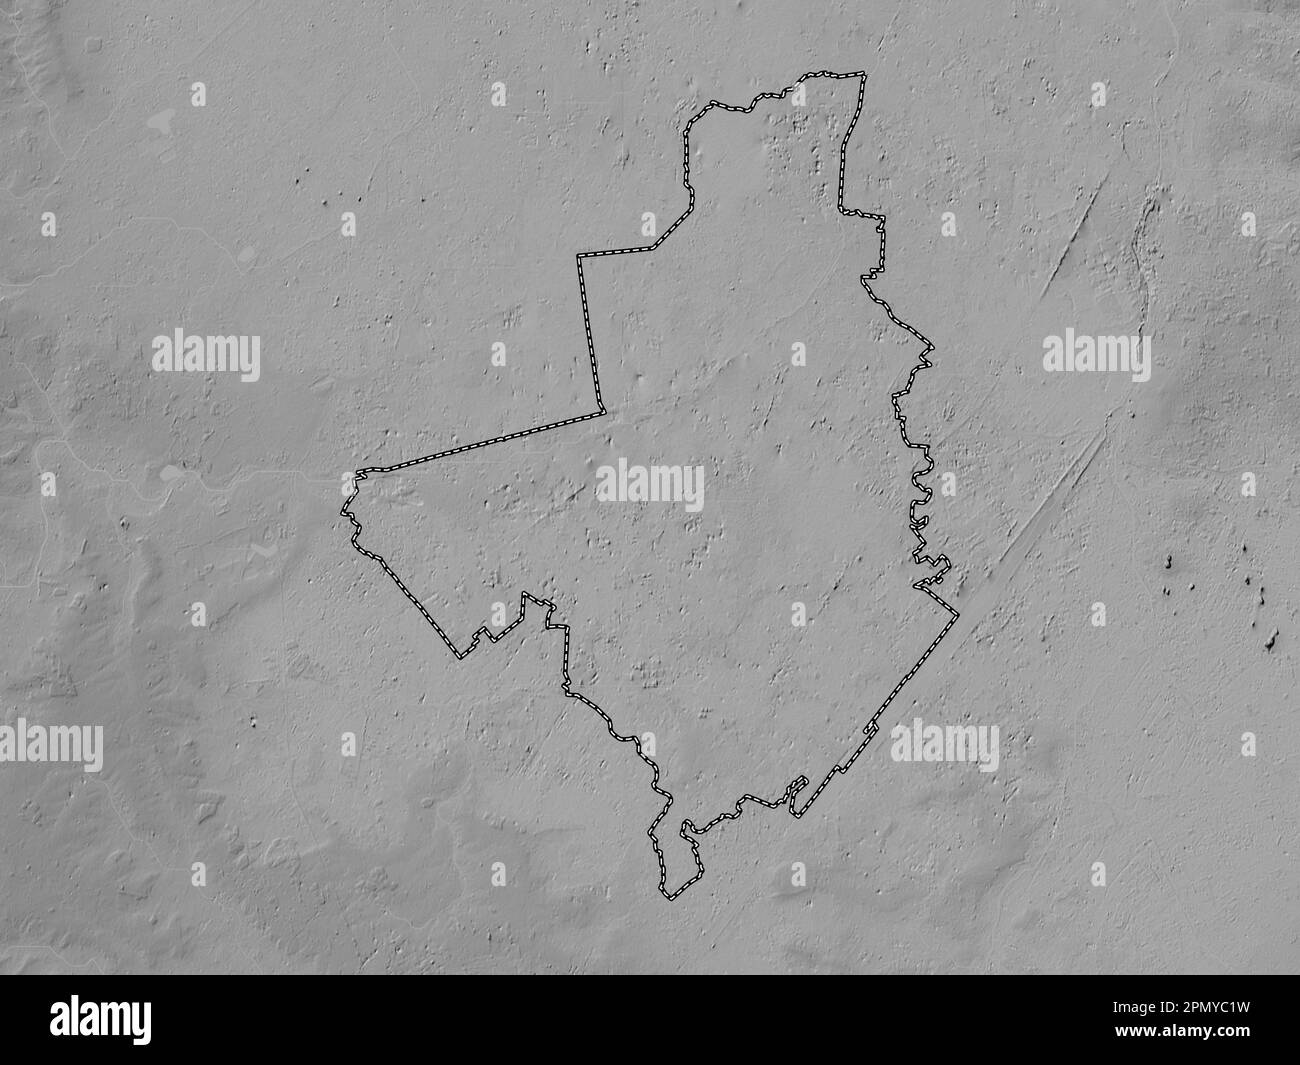 Fenland, non metropolitan district of England - Great Britain. Grayscale elevation map with lakes and rivers Stock Photo